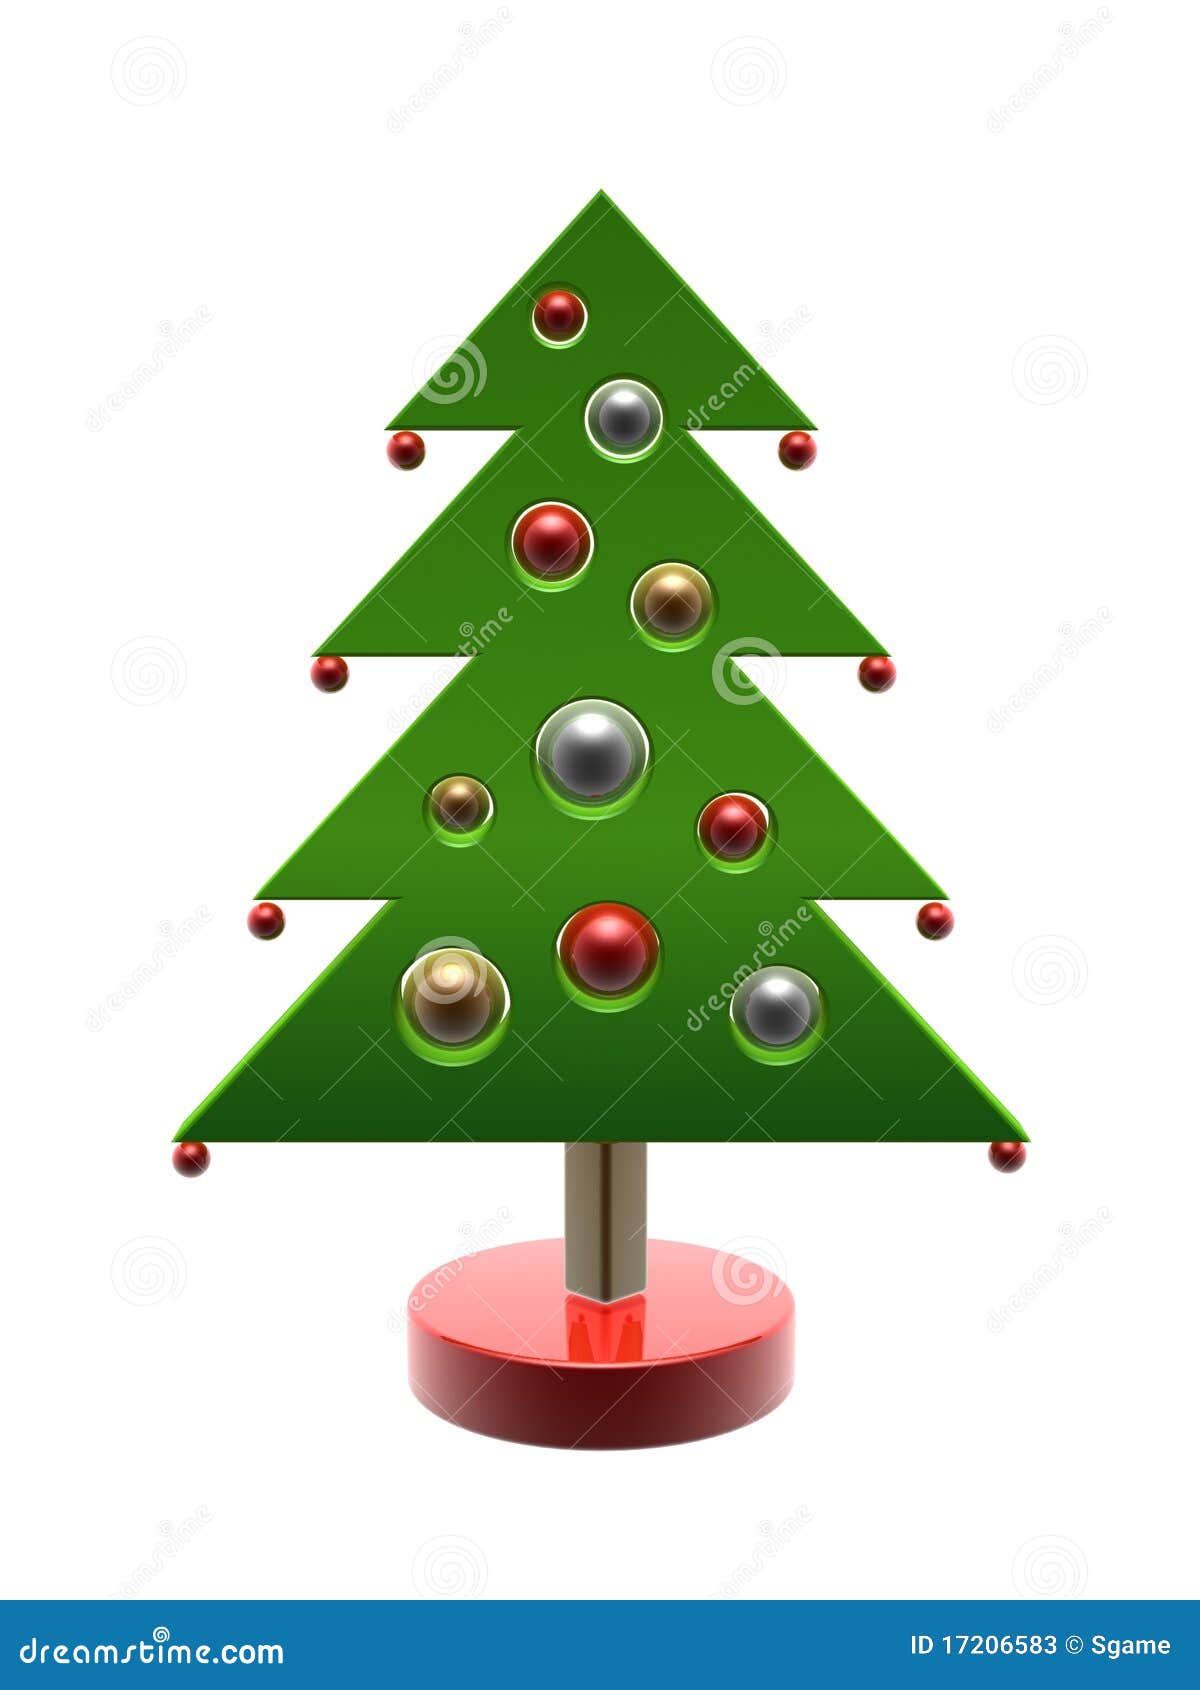 Cartoon Christmas tree with gift ball isolated on white background.